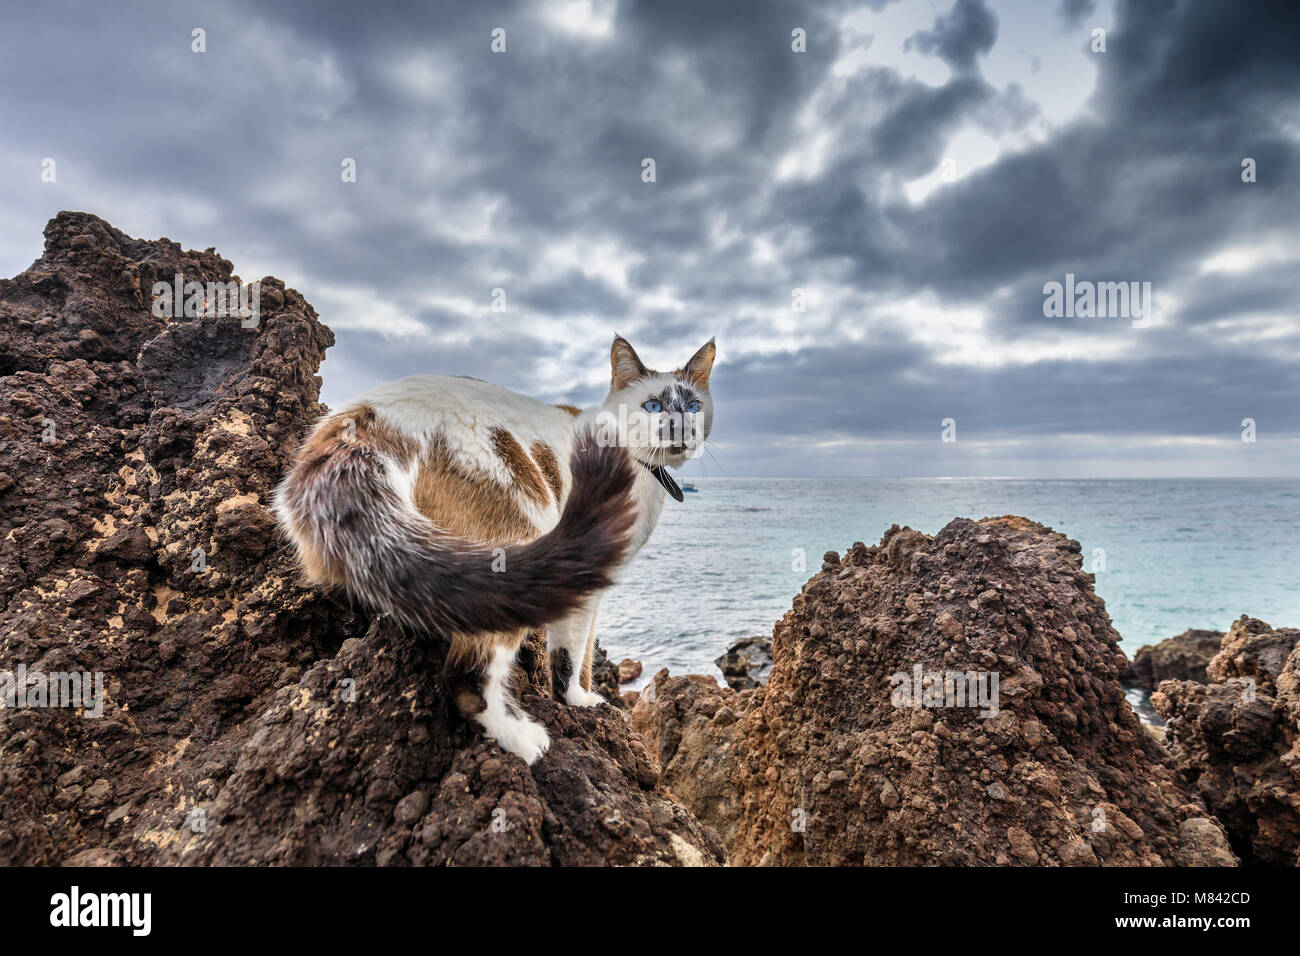 Cat sulle rocce, Punta Mujeres, Lanzarote, Isole Canarie, Spagna Foto Stock